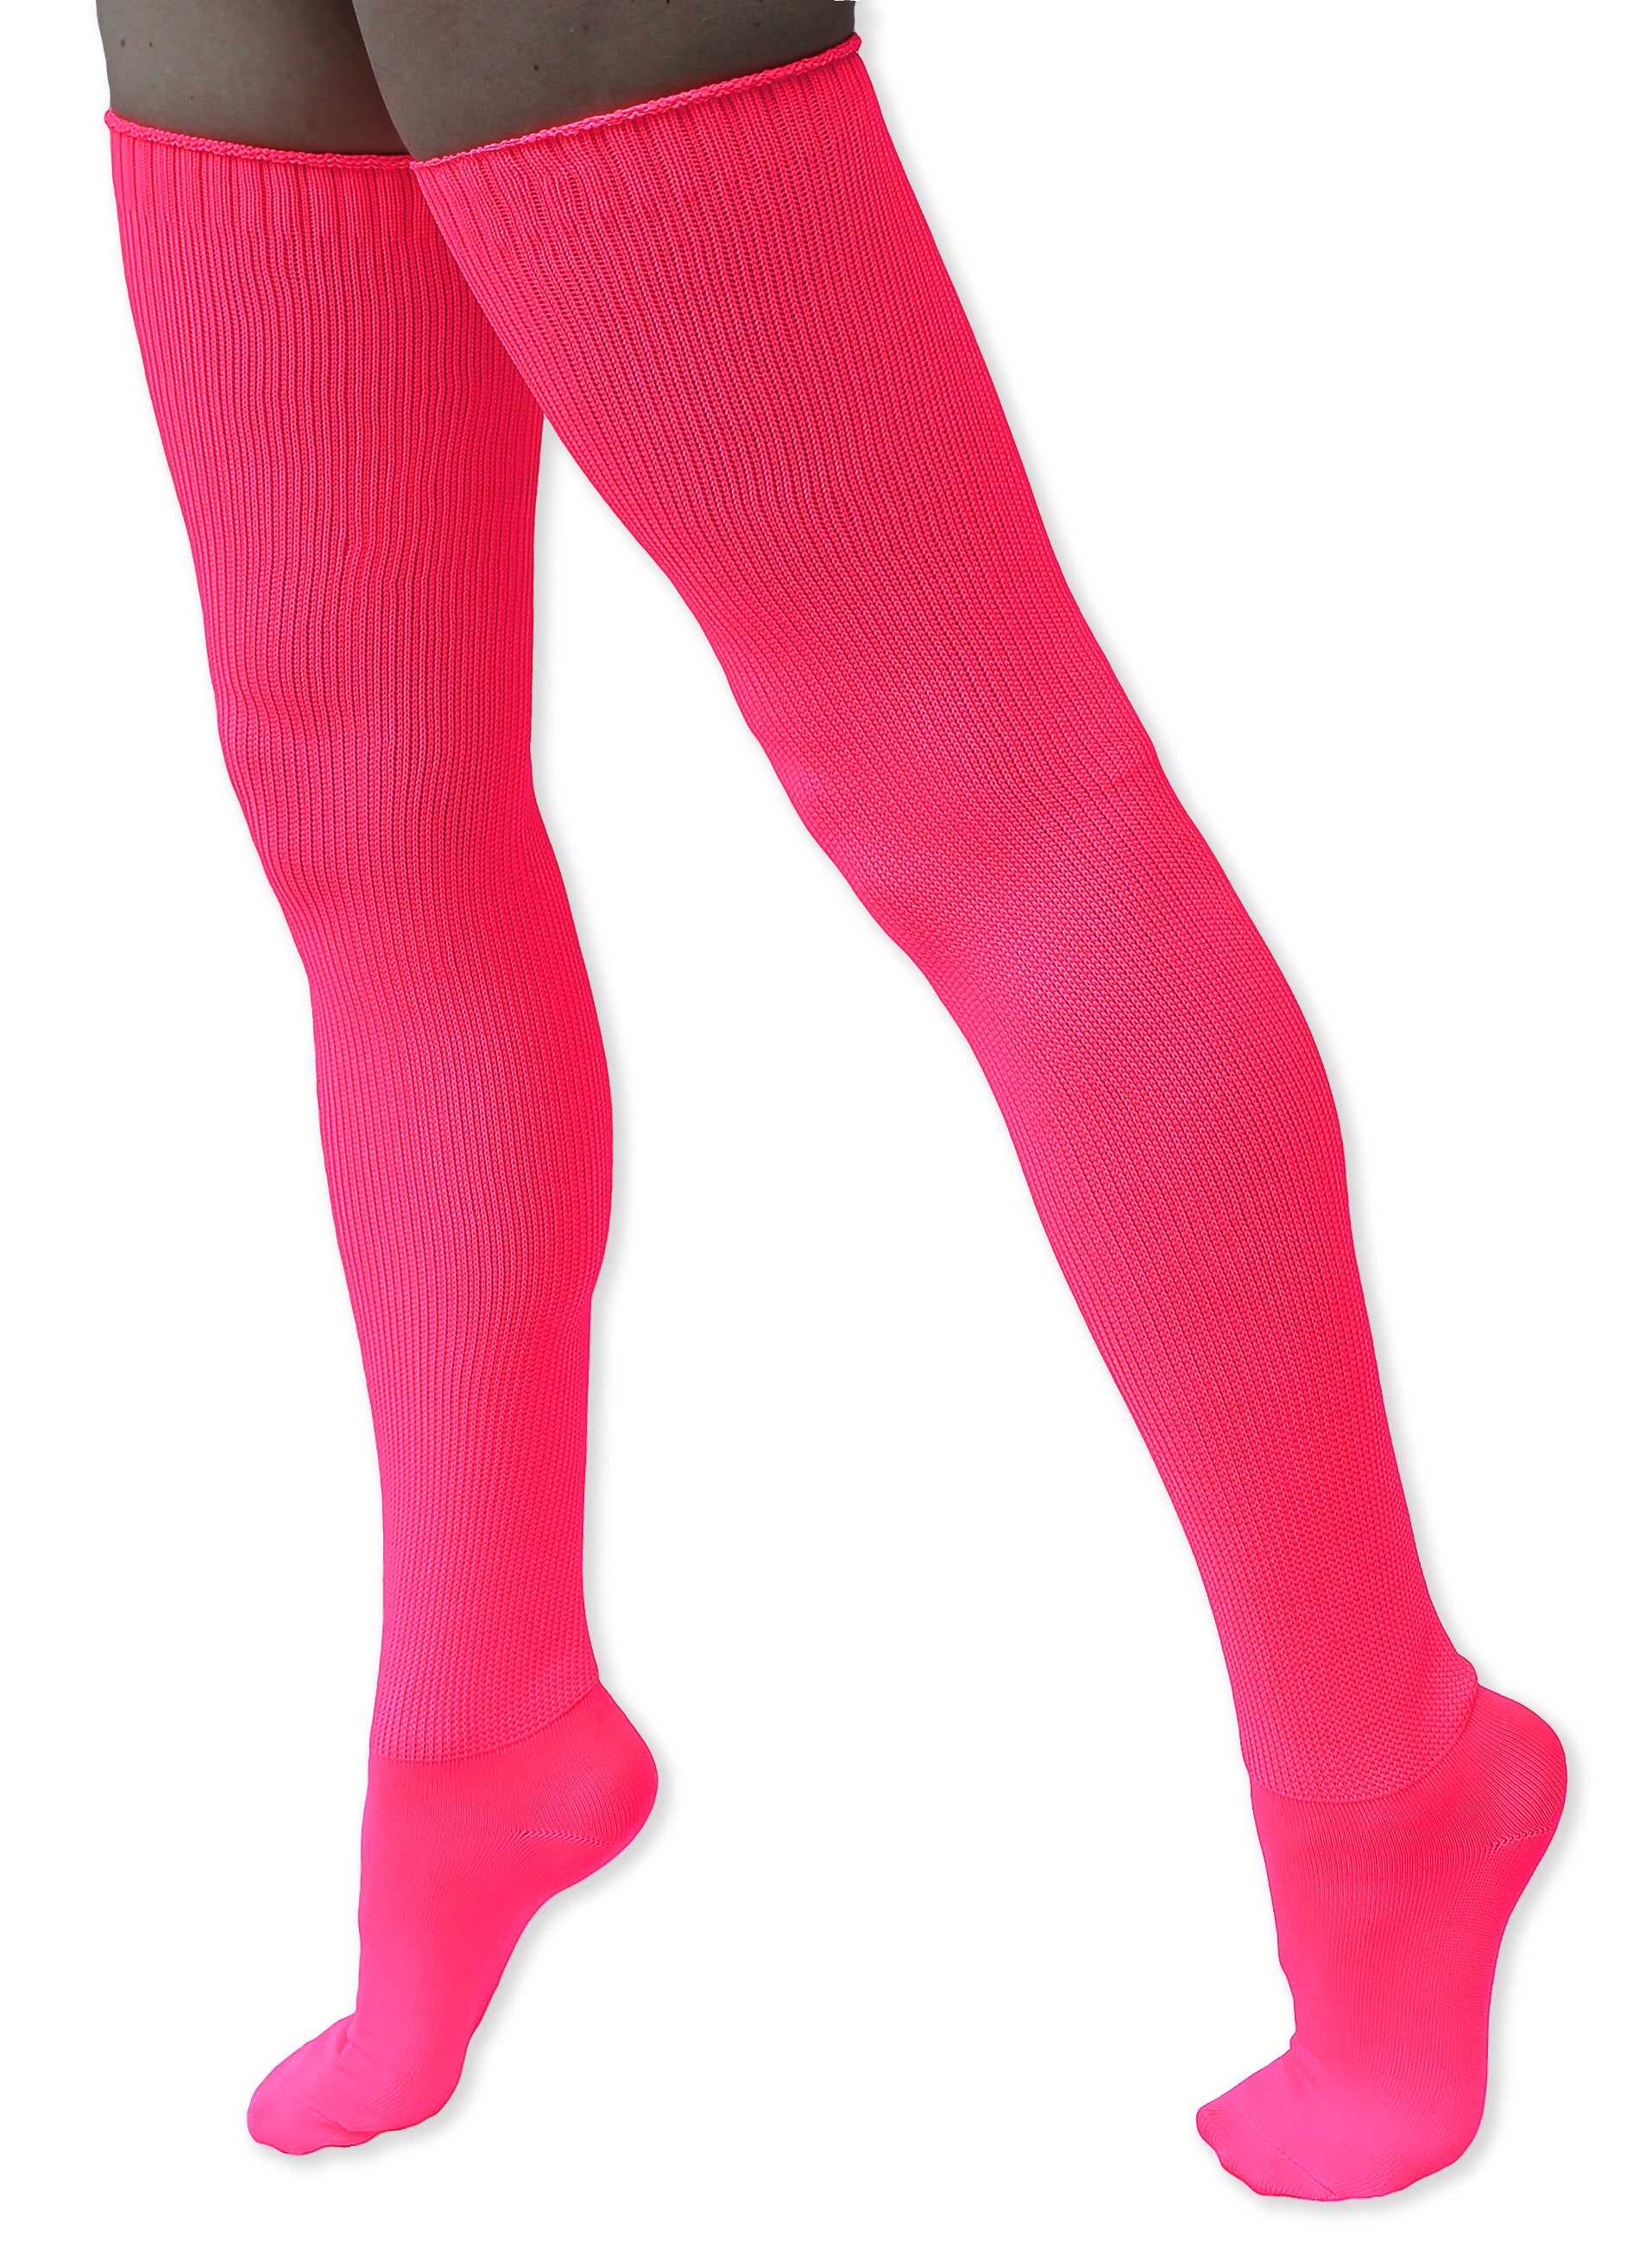 Extra Long Solid Color Thigh High Knit Socks